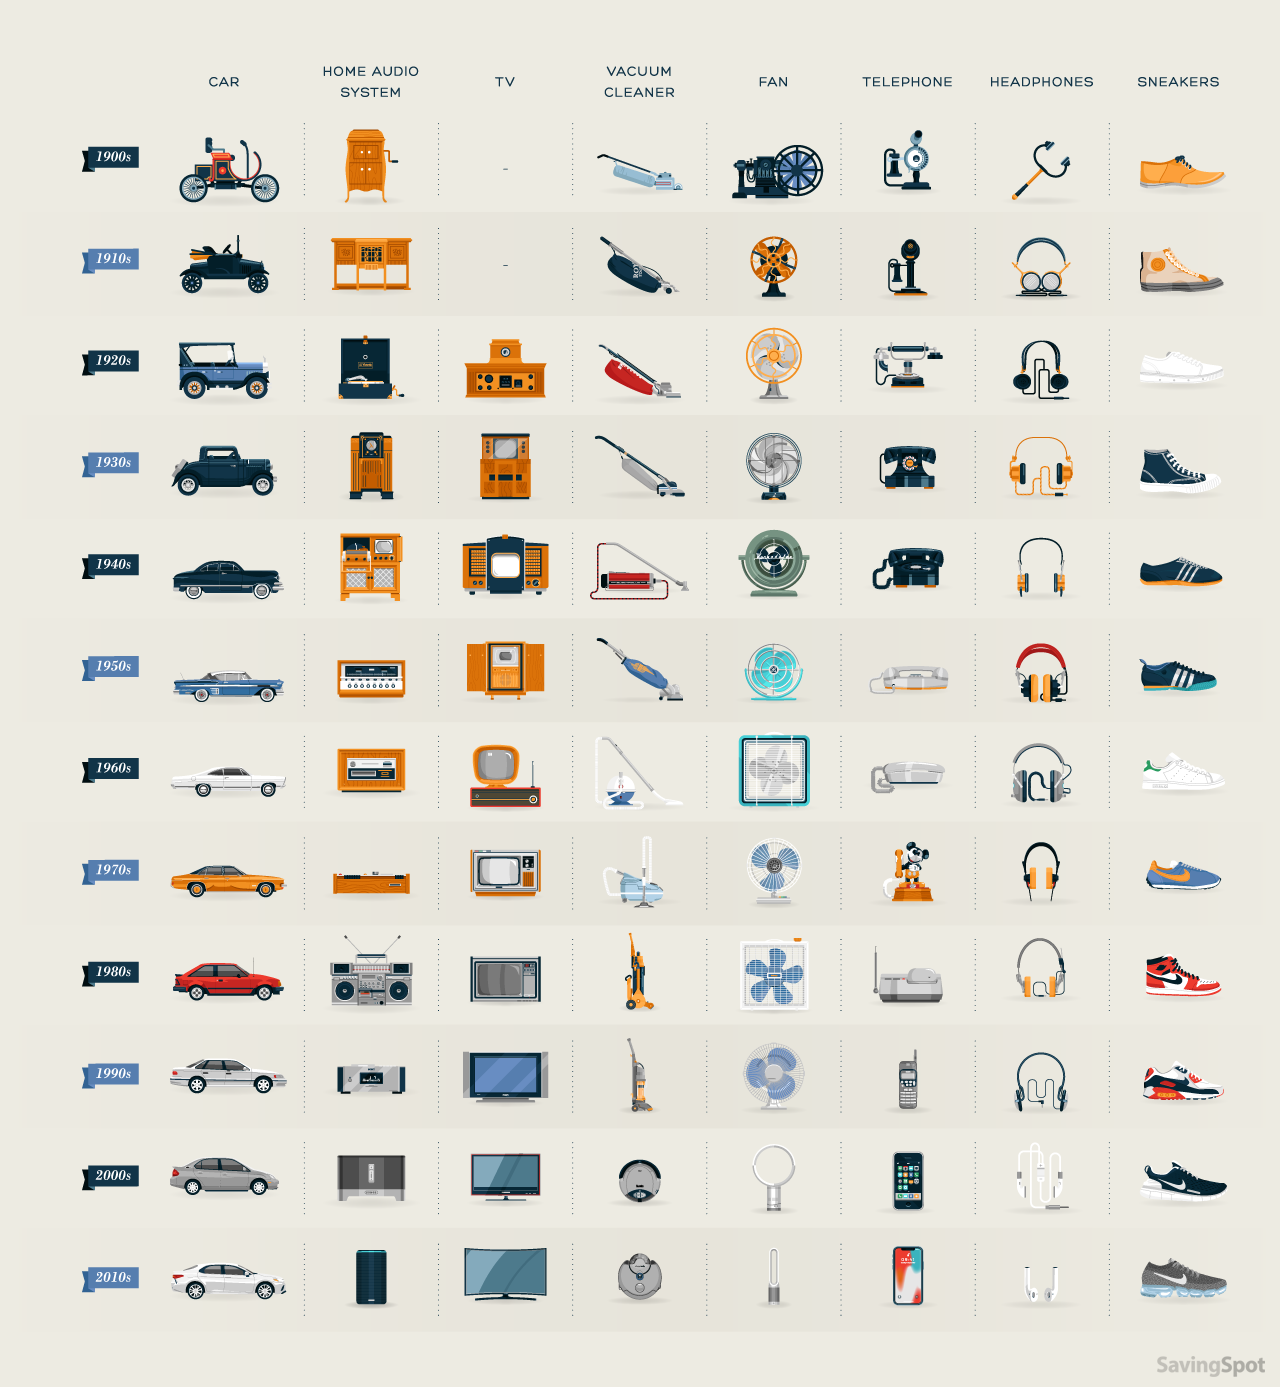 evolution of everyday objects